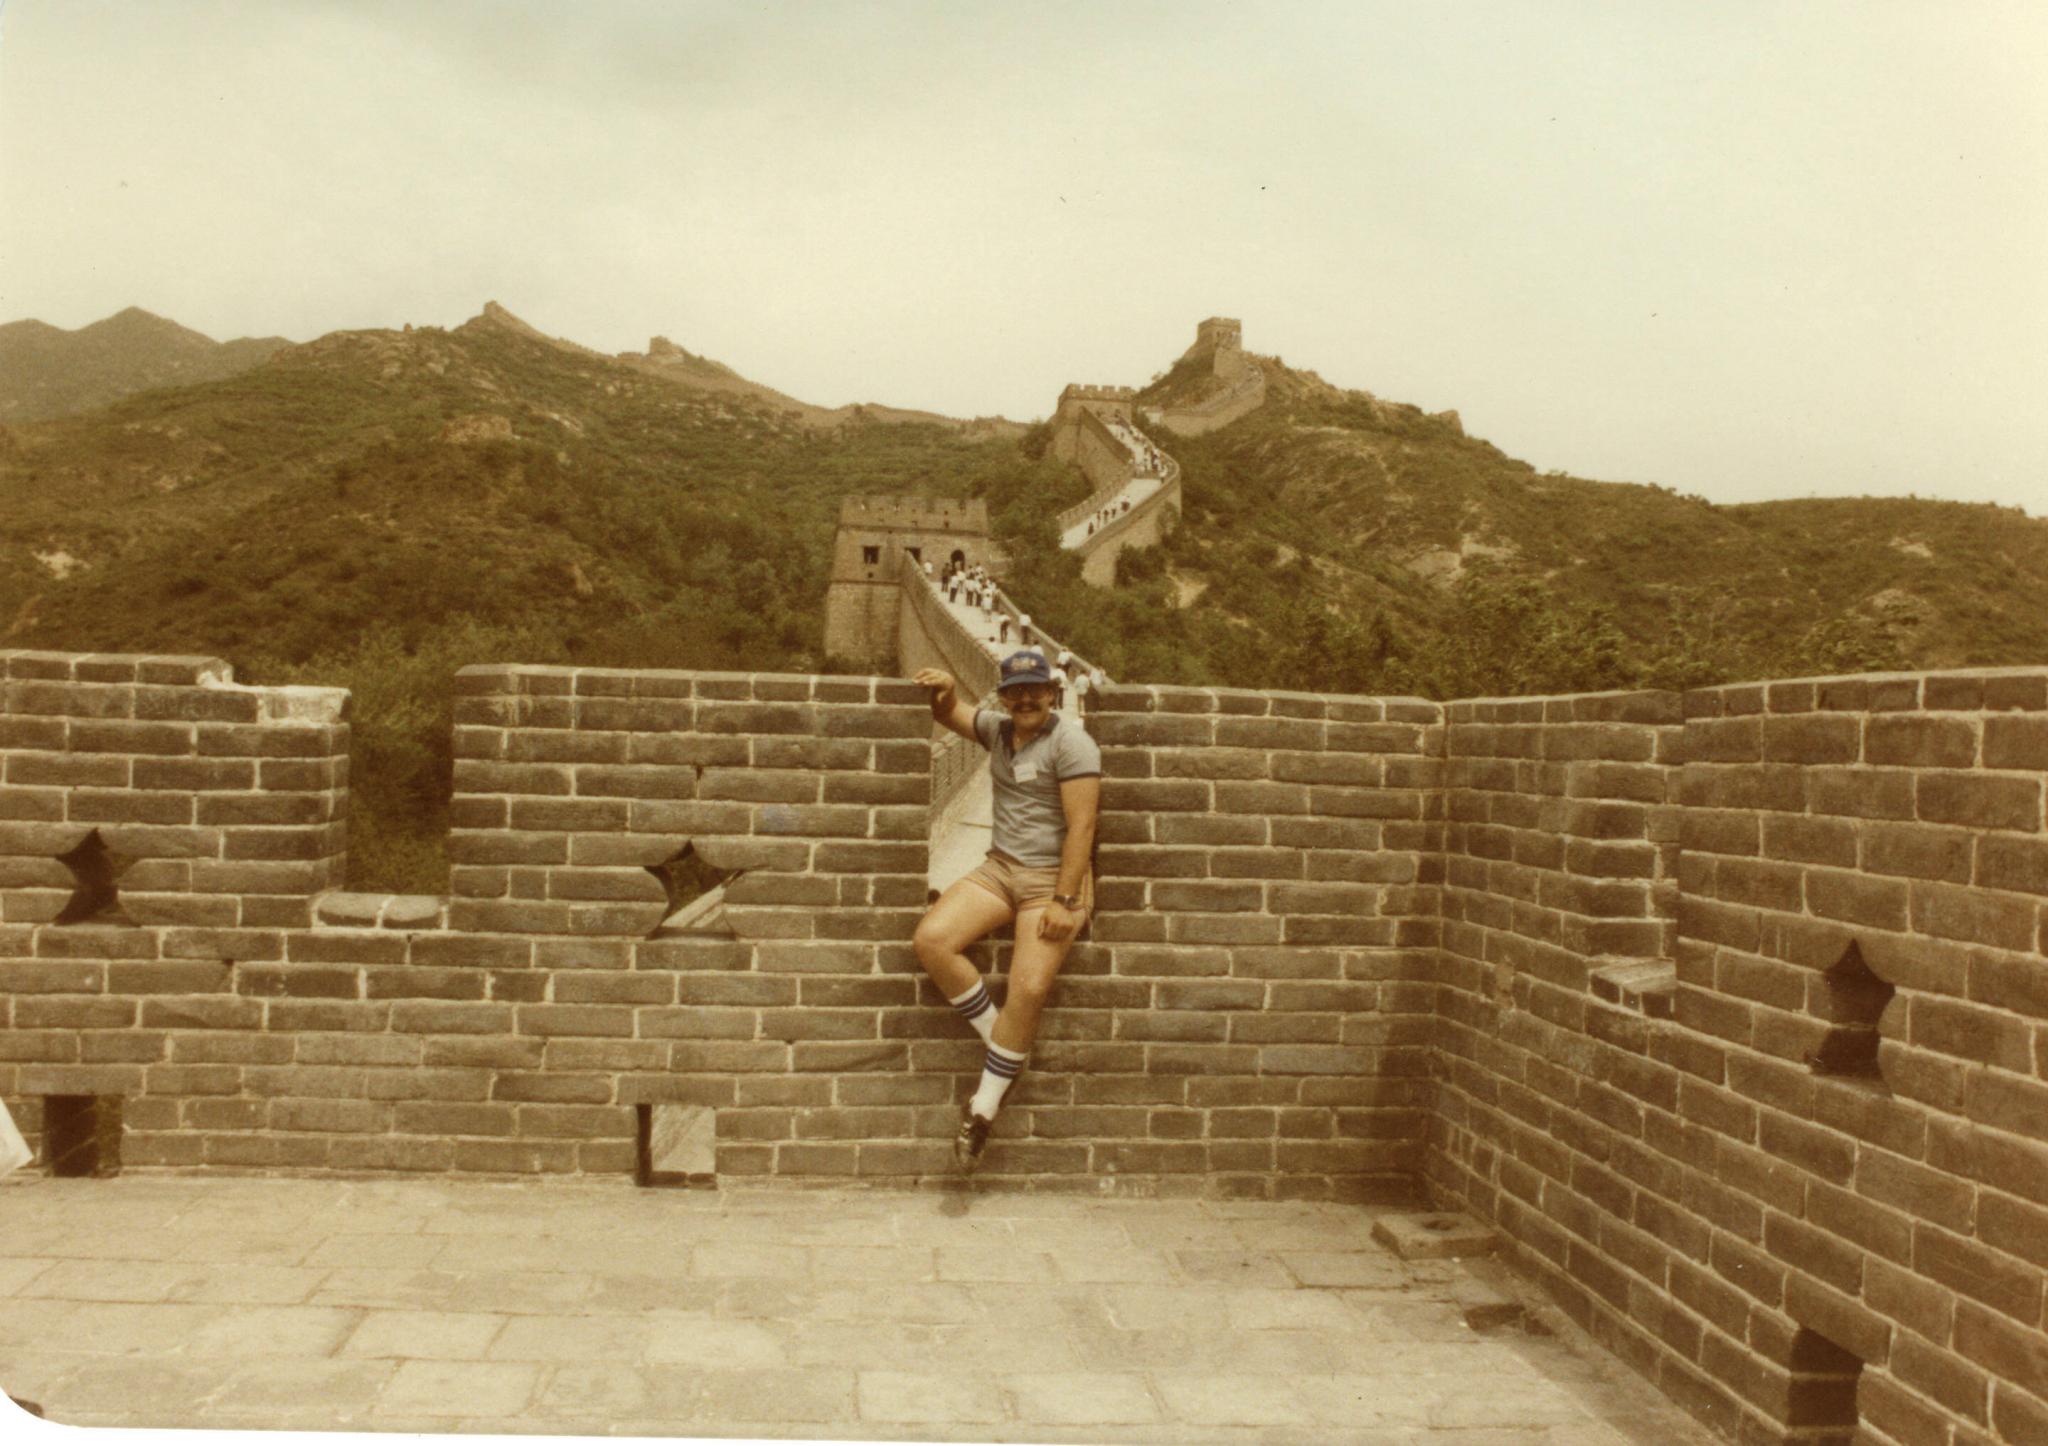 Gary Andersen on Great Wall of China (photo by Gary Andersen)